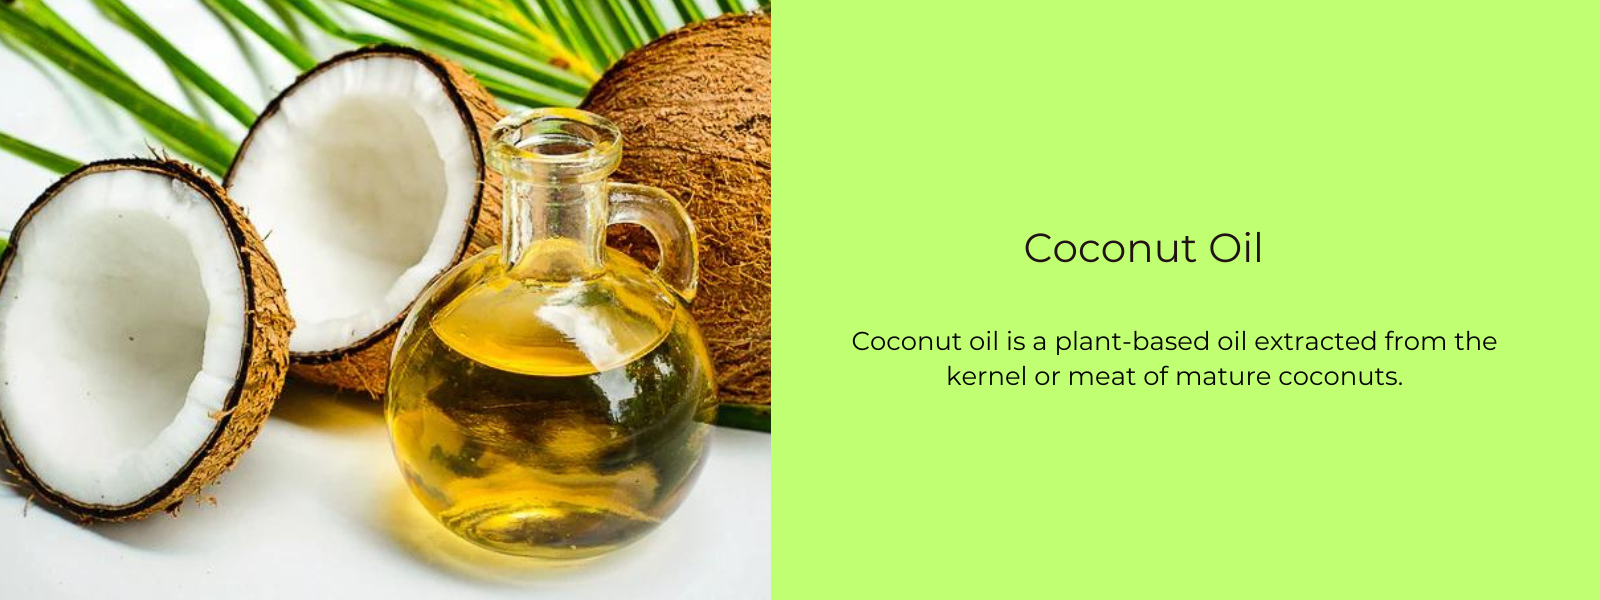 Coconut Oil - Health Benefits, Uses and Important Facts